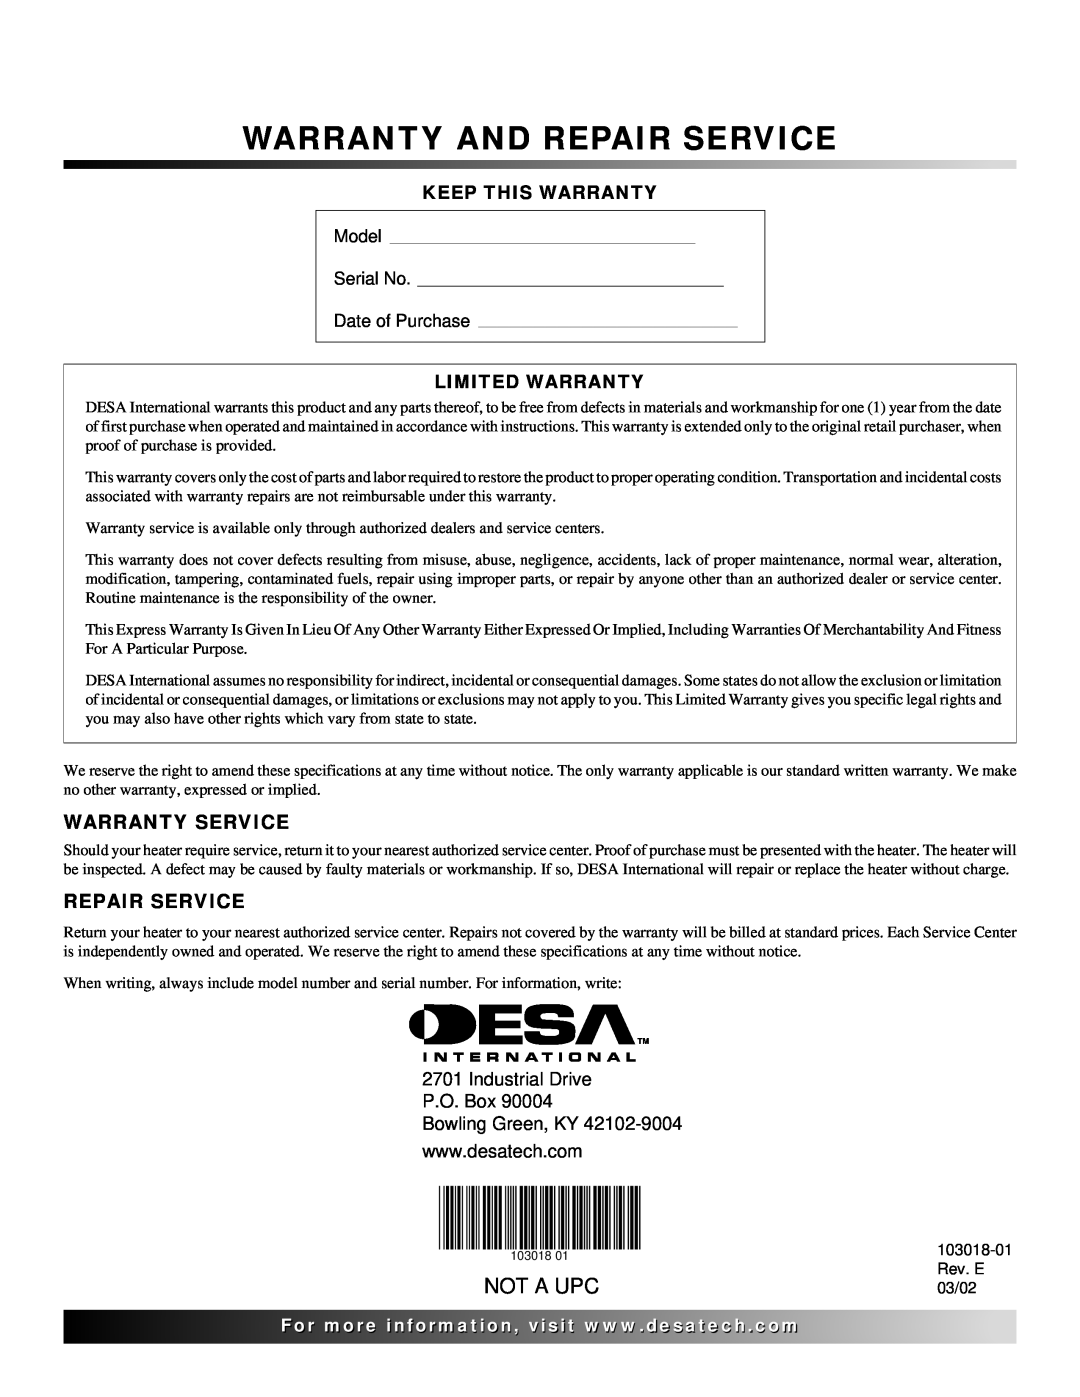 Desa AT Series owner manual Warranty And Repair Service, Not A Upc, Warranty Service, Keep This Warranty, Limited Warranty 